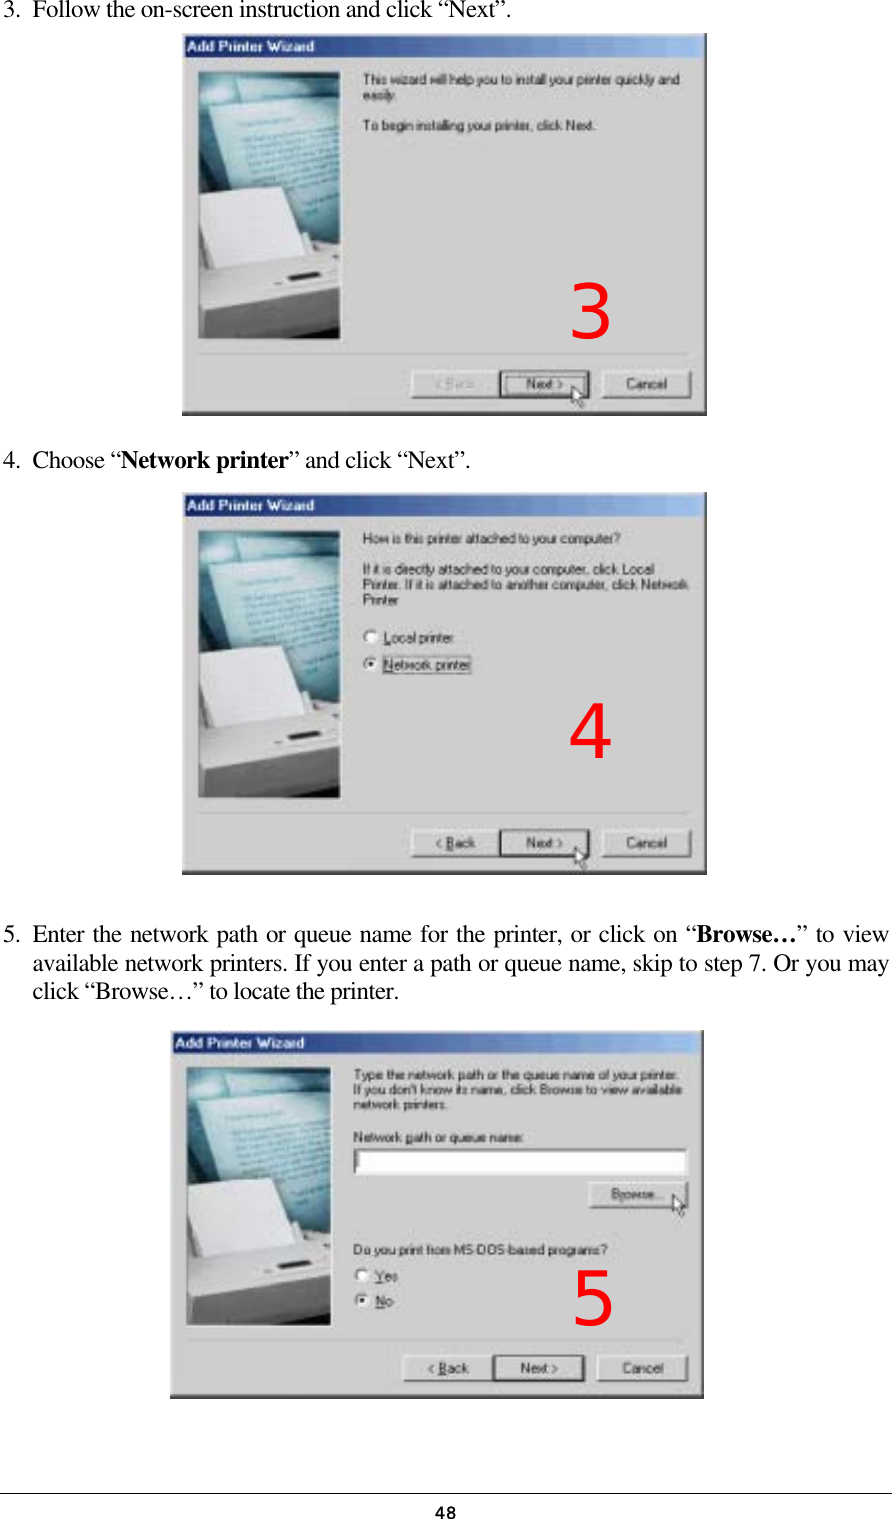   483.  Follow the on-screen instruction and click “Next”.         4. Choose “Network printer” and click “Next”.         5. Enter the network path or queue name for the printer, or click on “Browse…” to view available network printers. If you enter a path or queue name, skip to step 7. Or you may click “Browse…” to locate the printer.       5 4 3 